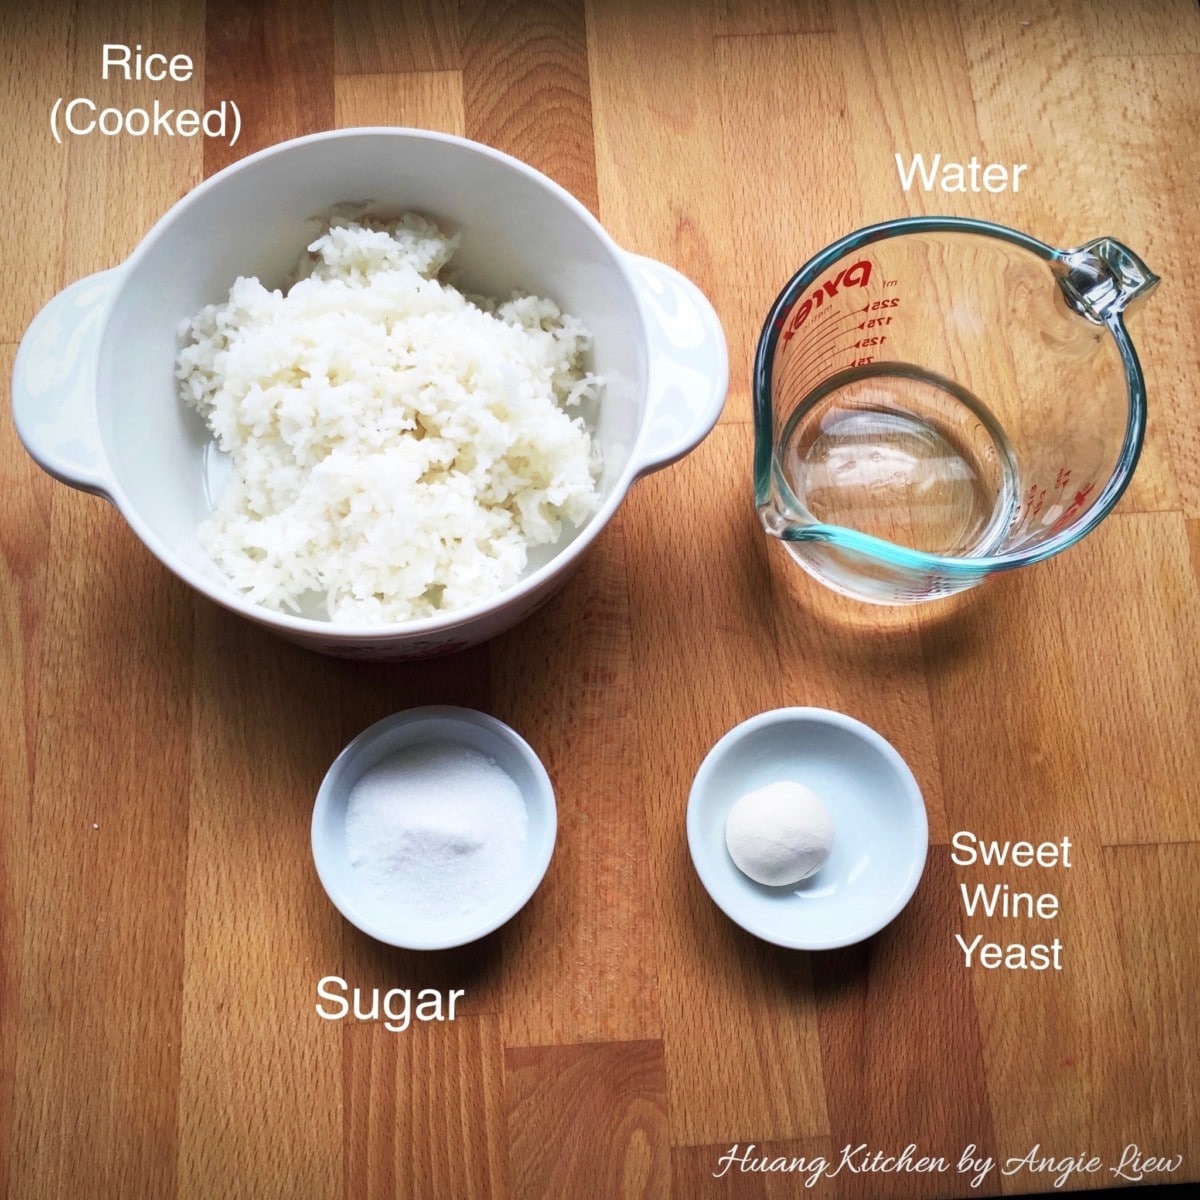 Ingredients to ferment rice.